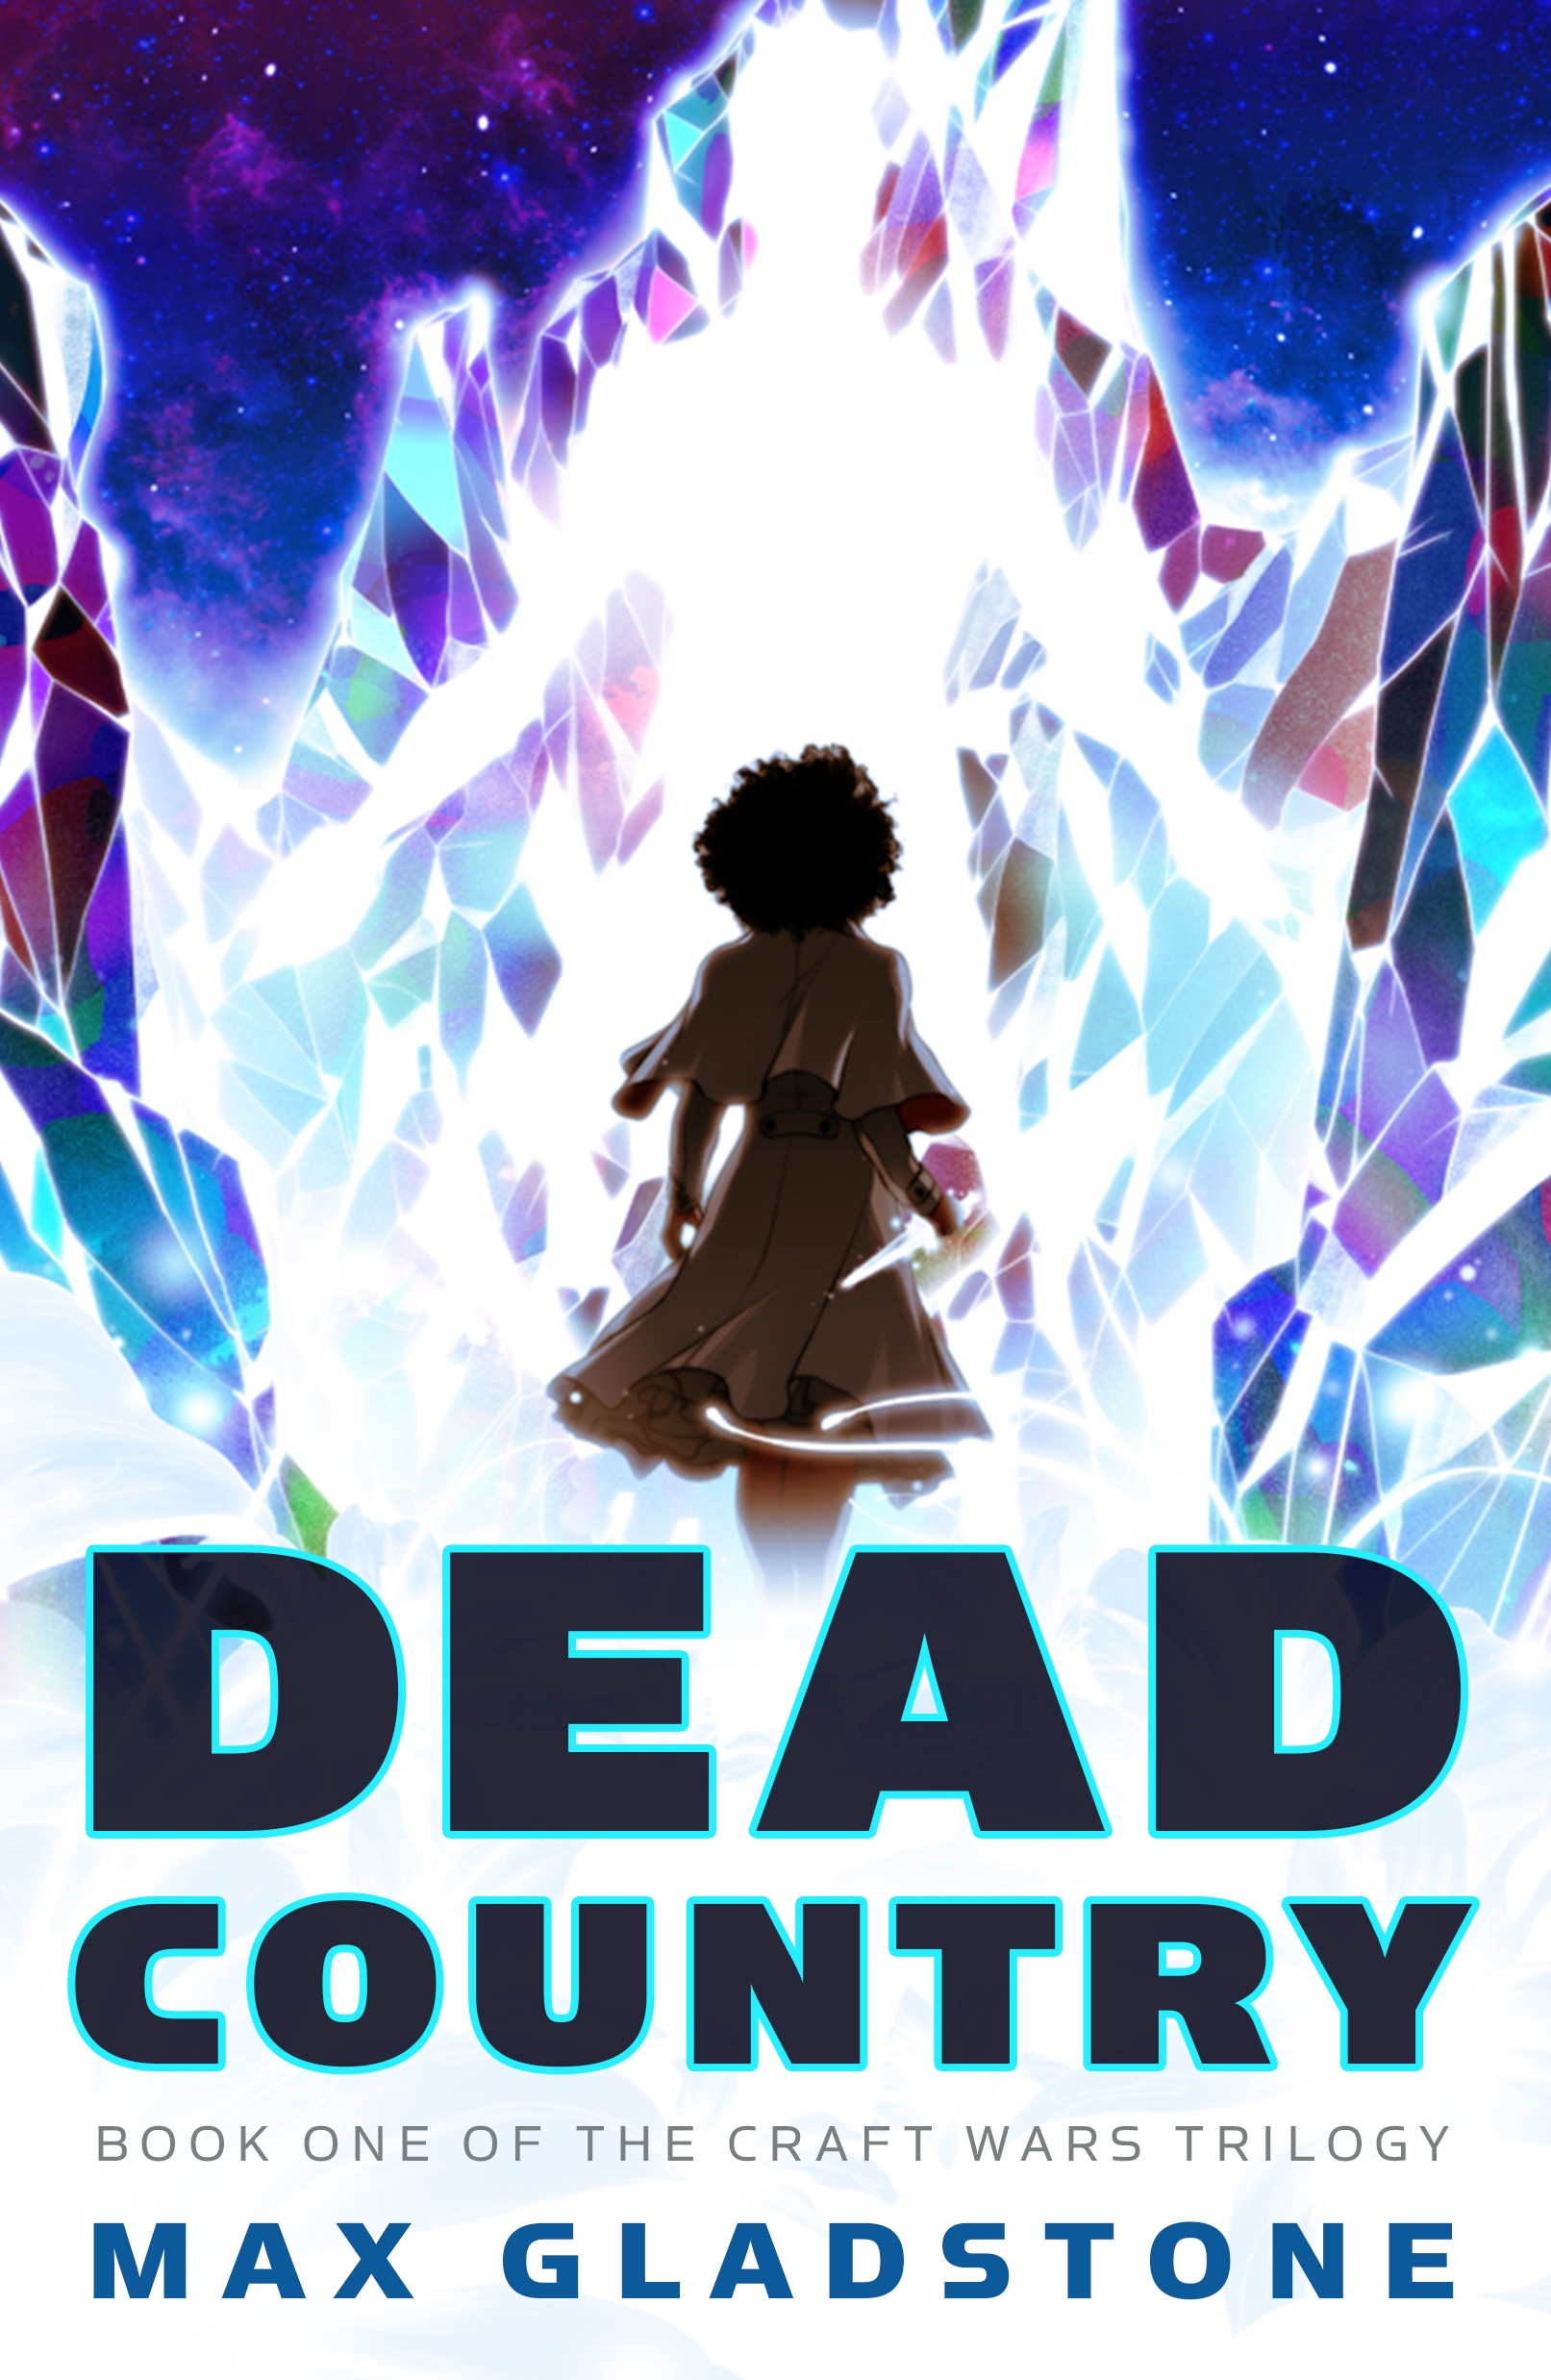 Dead Country : Book One of the Craft Wars Series by Max Gladstone